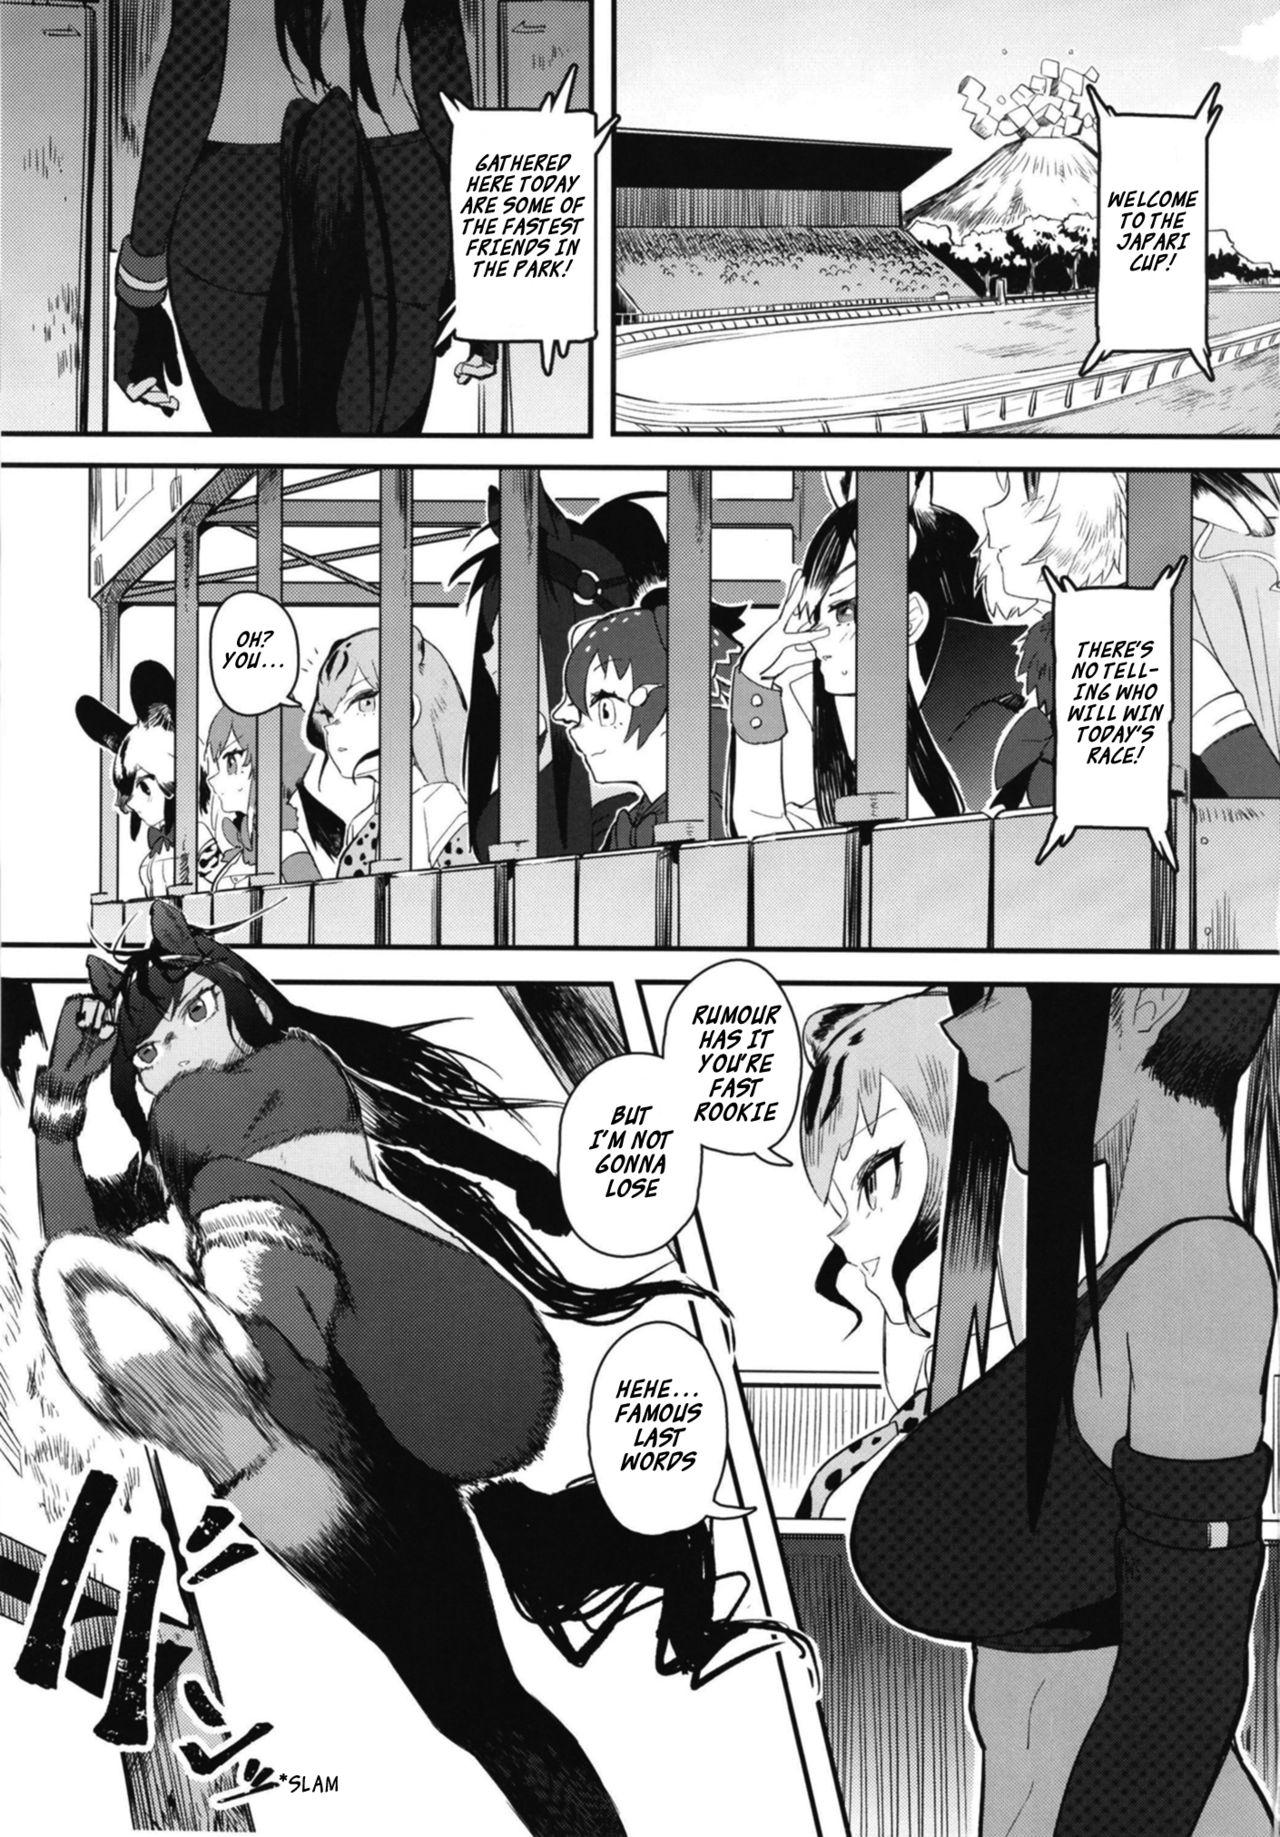 Nerd Thoroughbred Early Days 2 - Kemono friends Gay Big Cock - Page 3